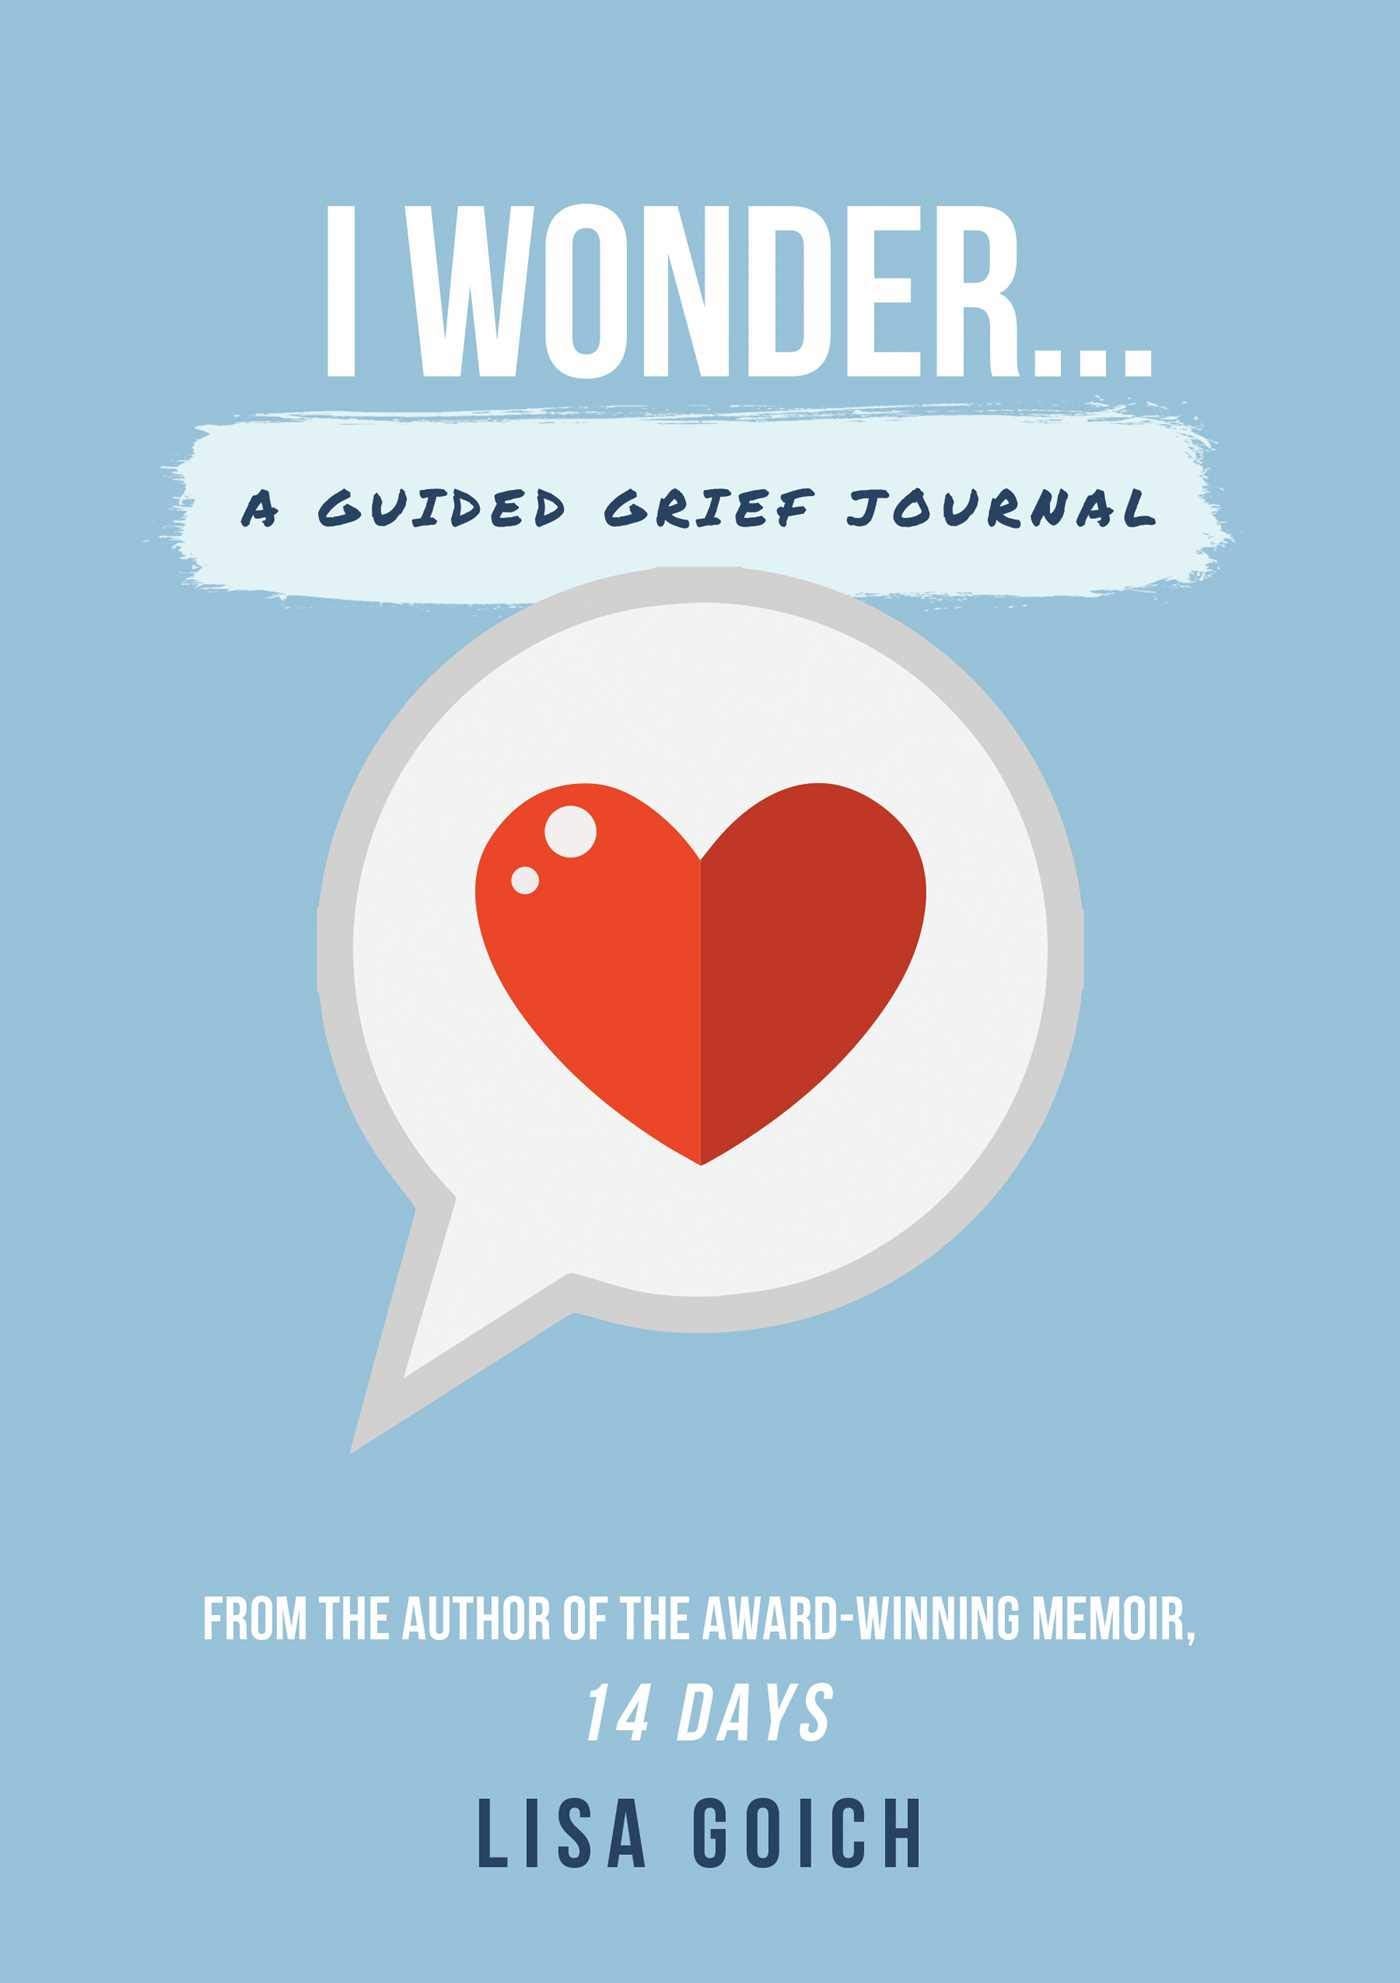 I Wonder: A Guided Grief Journal